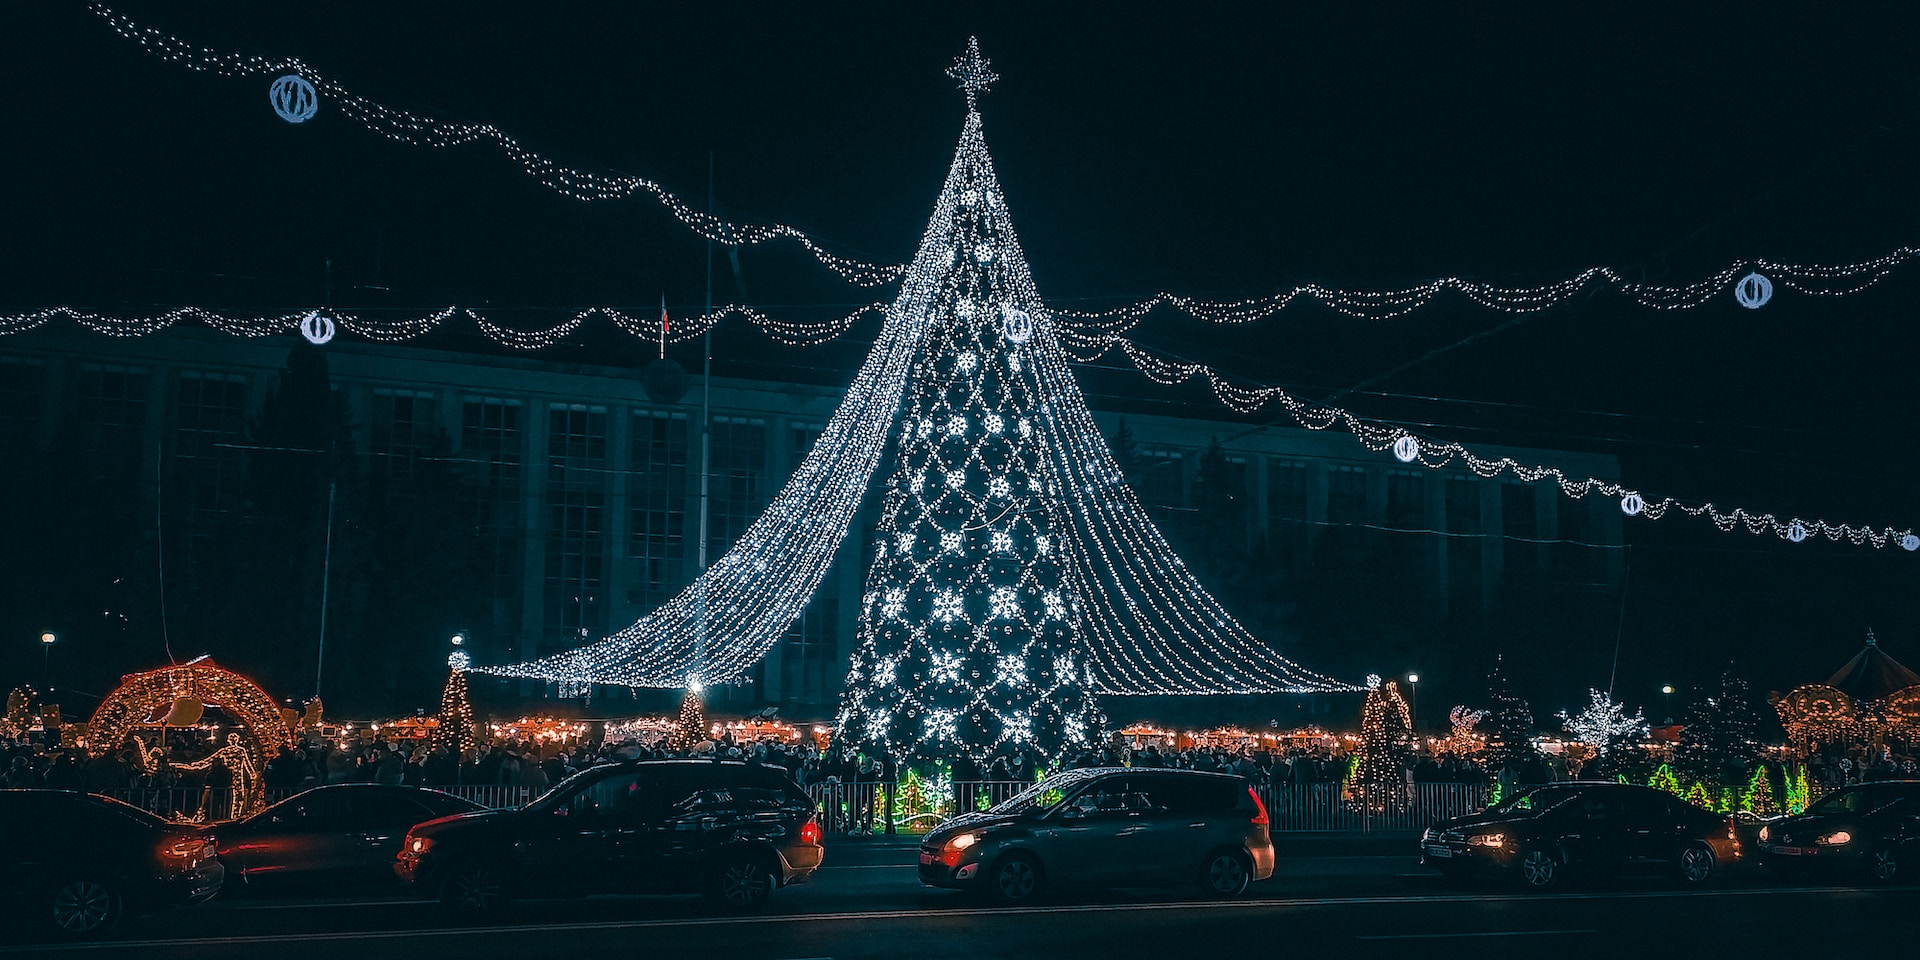 Christmas in Moldova is characterized by both Orthodox and Christian traditions.